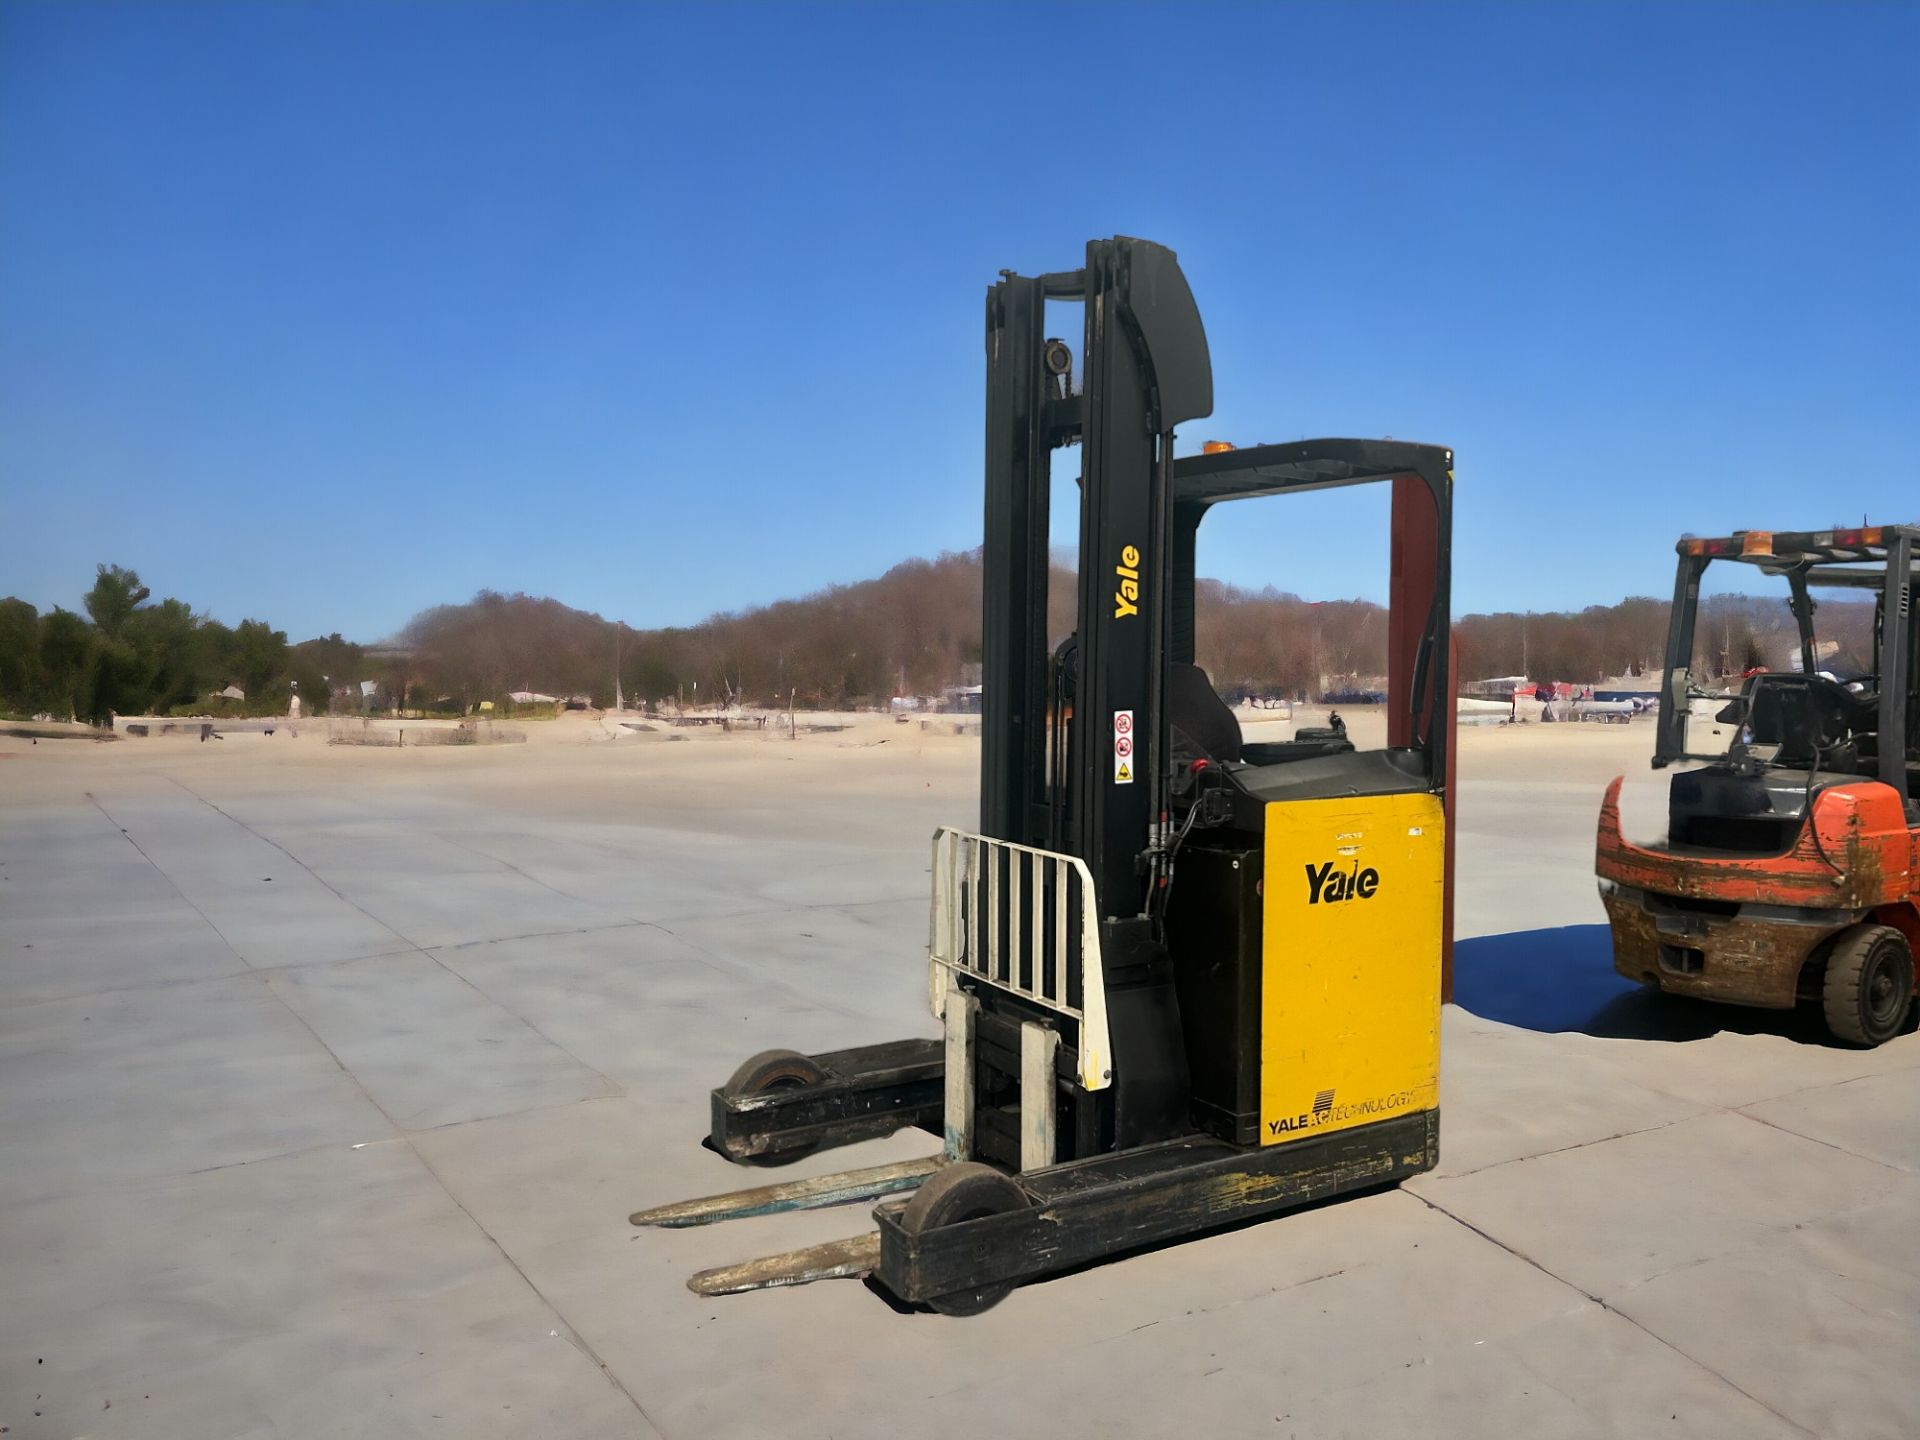 YALE MR16 REACH TRUCK - HIGH-PERFORMANCE ELECTRIC MATERIAL HANDLER **(INCLUDES CHARGER)** - Image 3 of 6